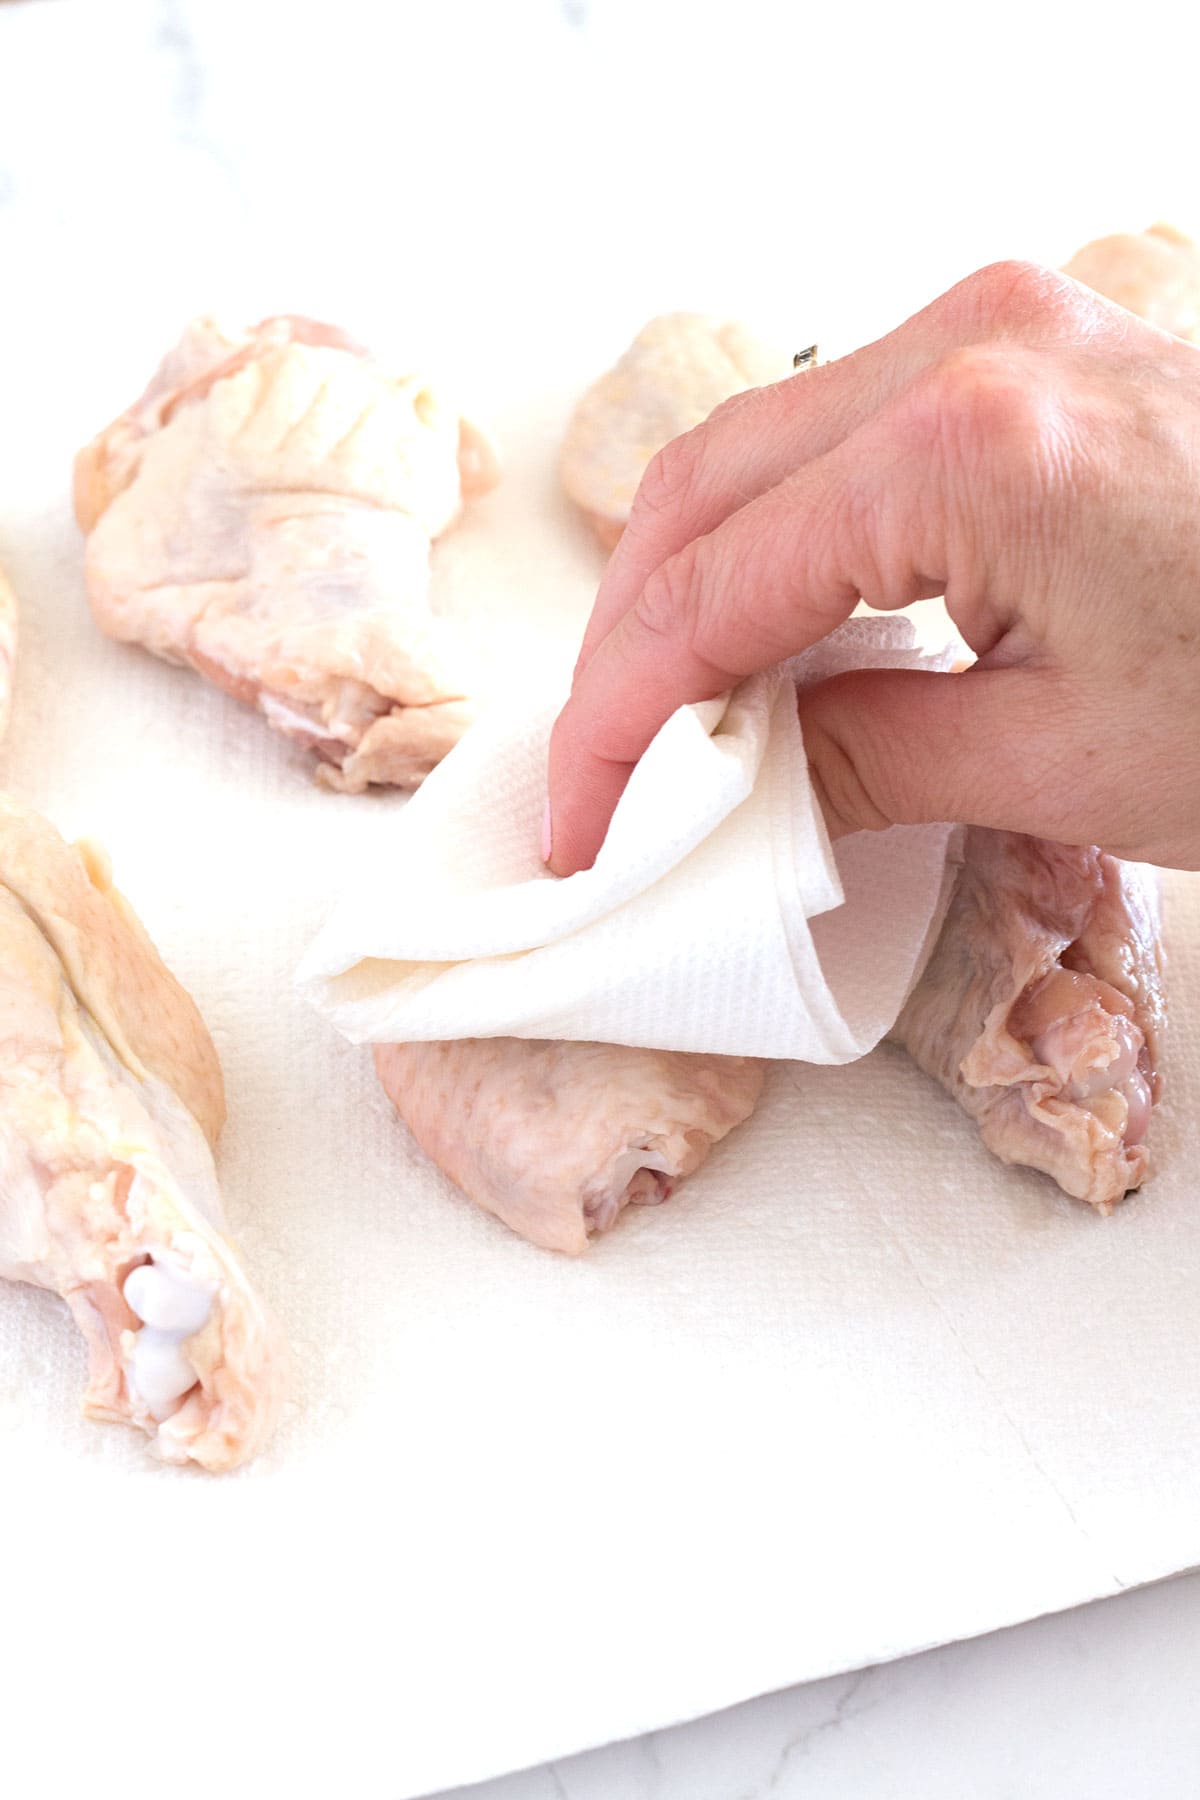 Drying chicken wings with paper towels for optimum crispiness.